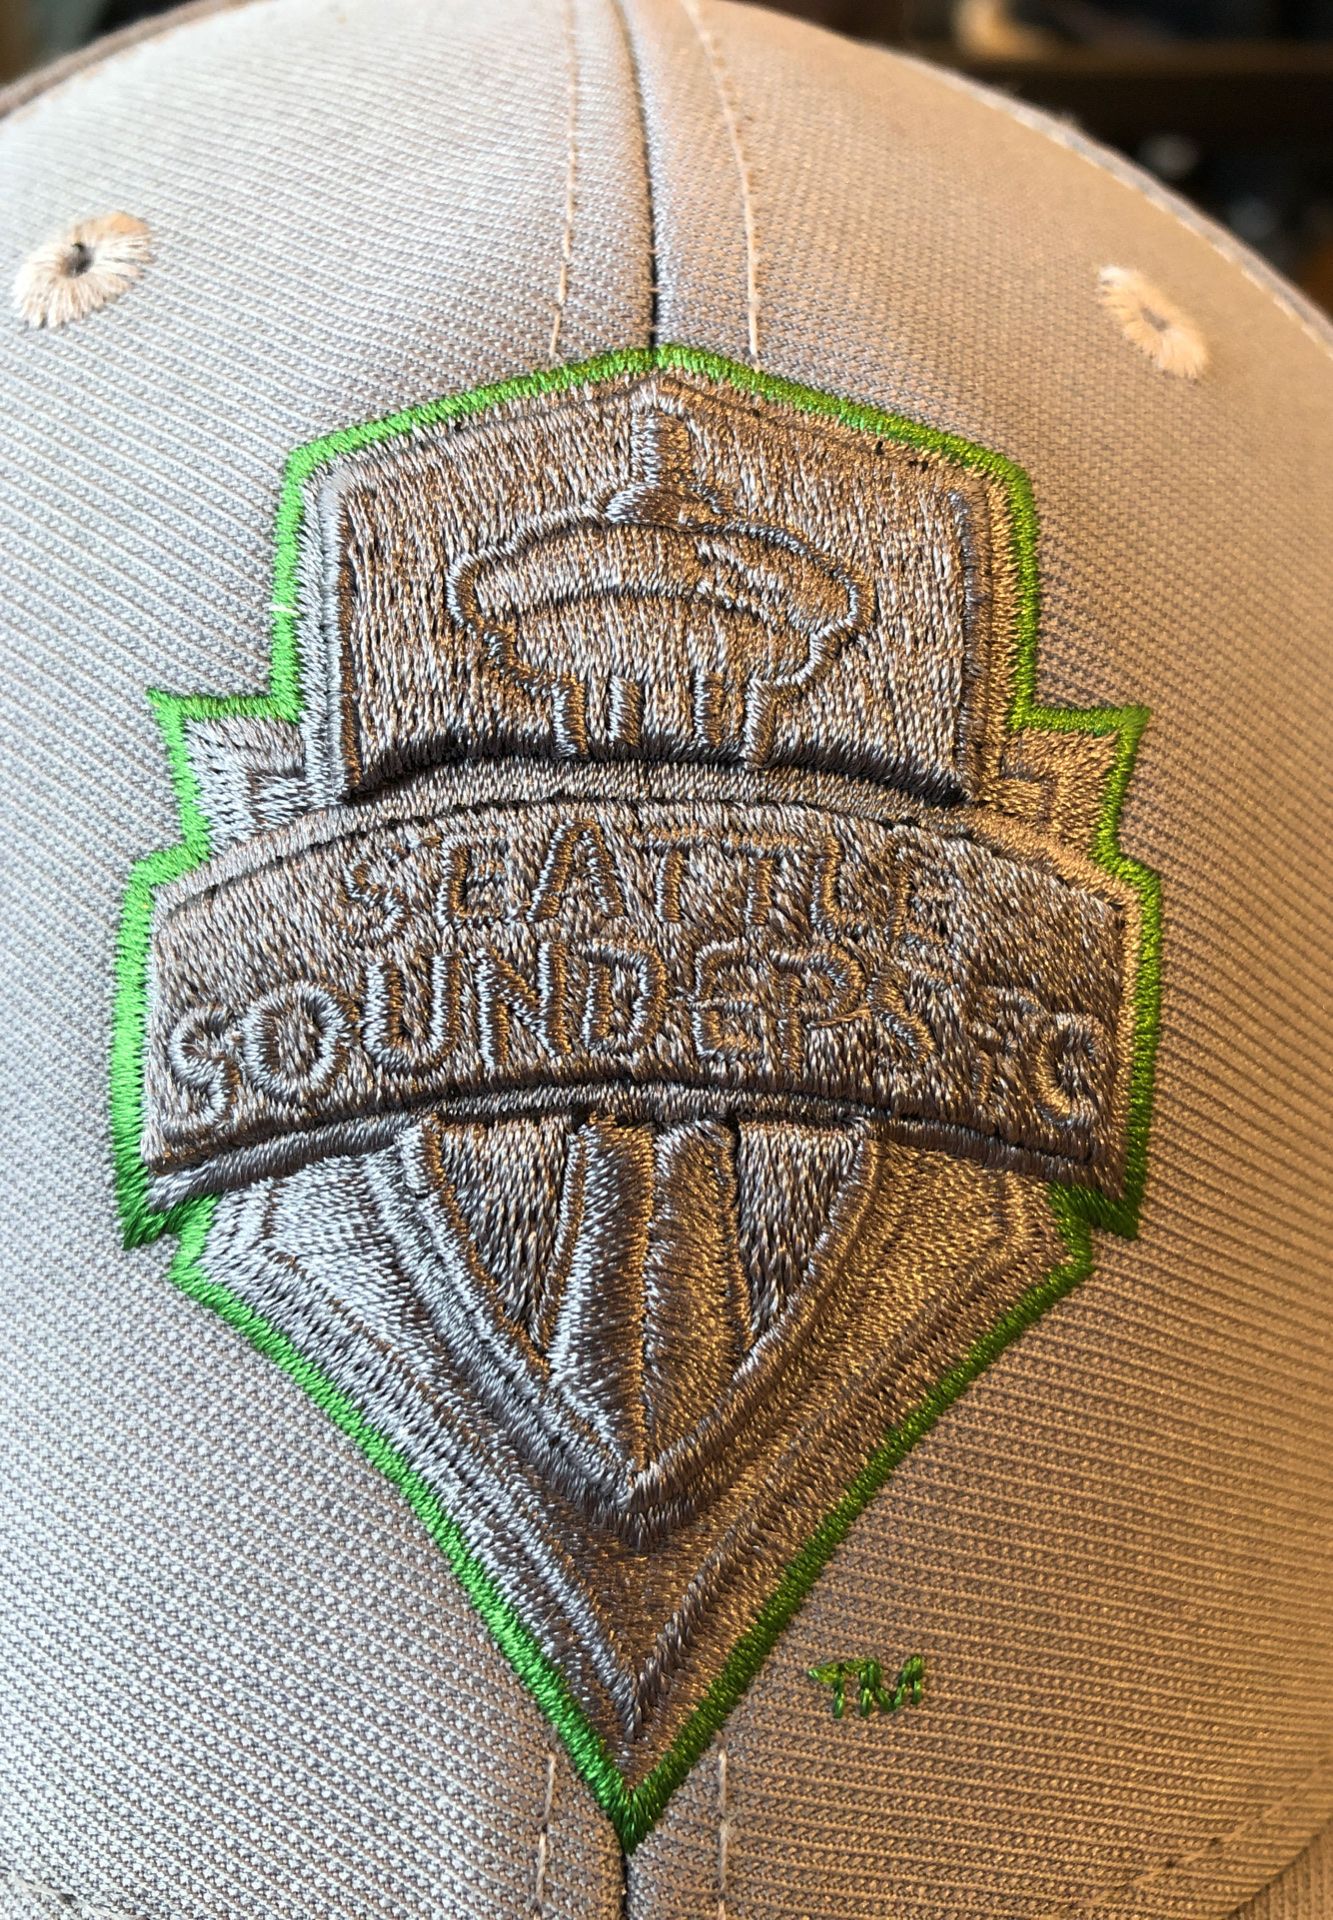 Sounders FC tickets 2020